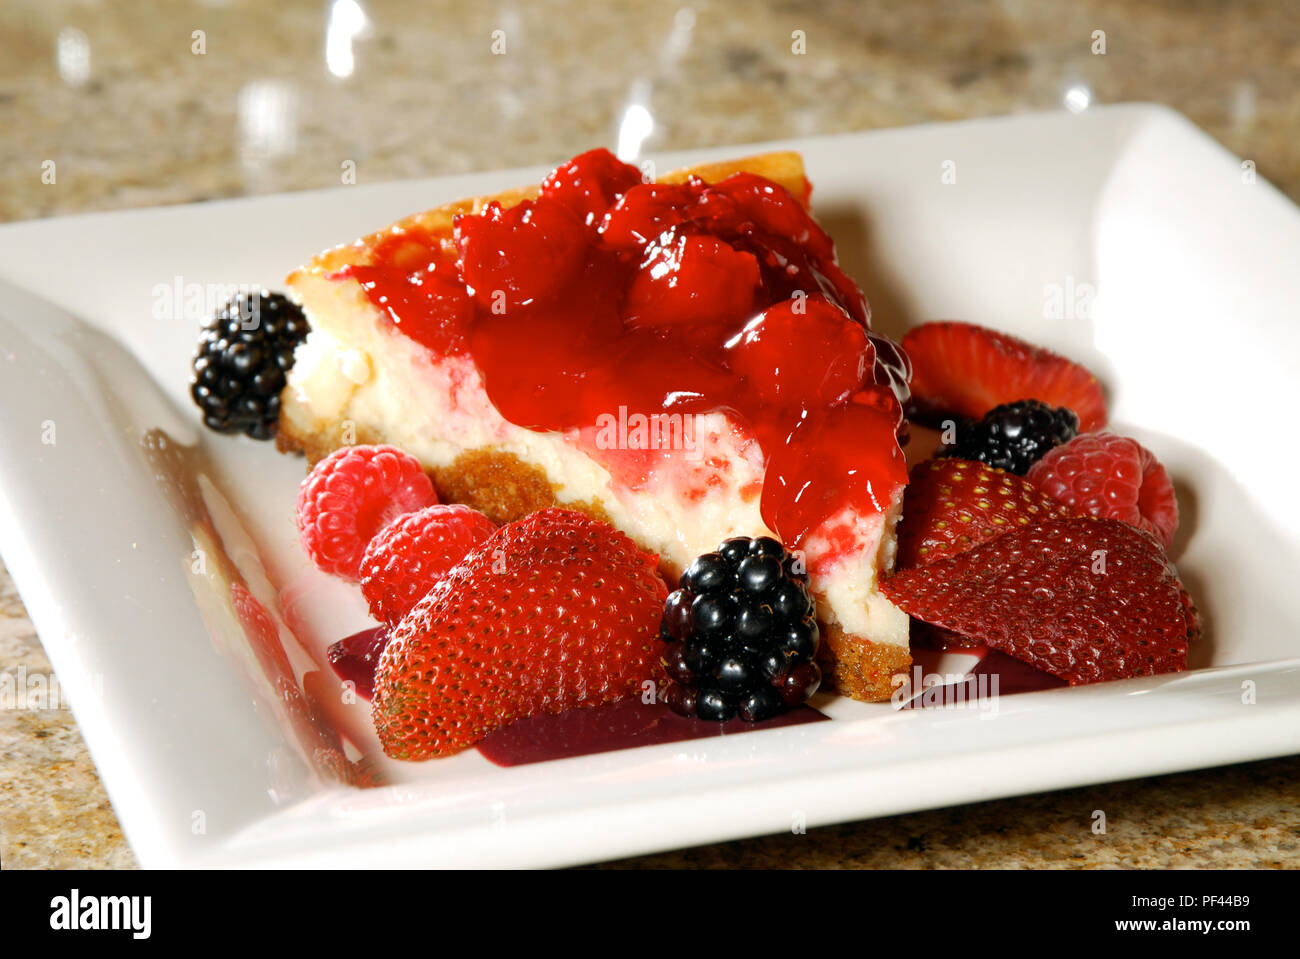 Royalty free stock photo of a slice of cheesecake with strawberries and blackberries.  Food stock photos. Stock Photo